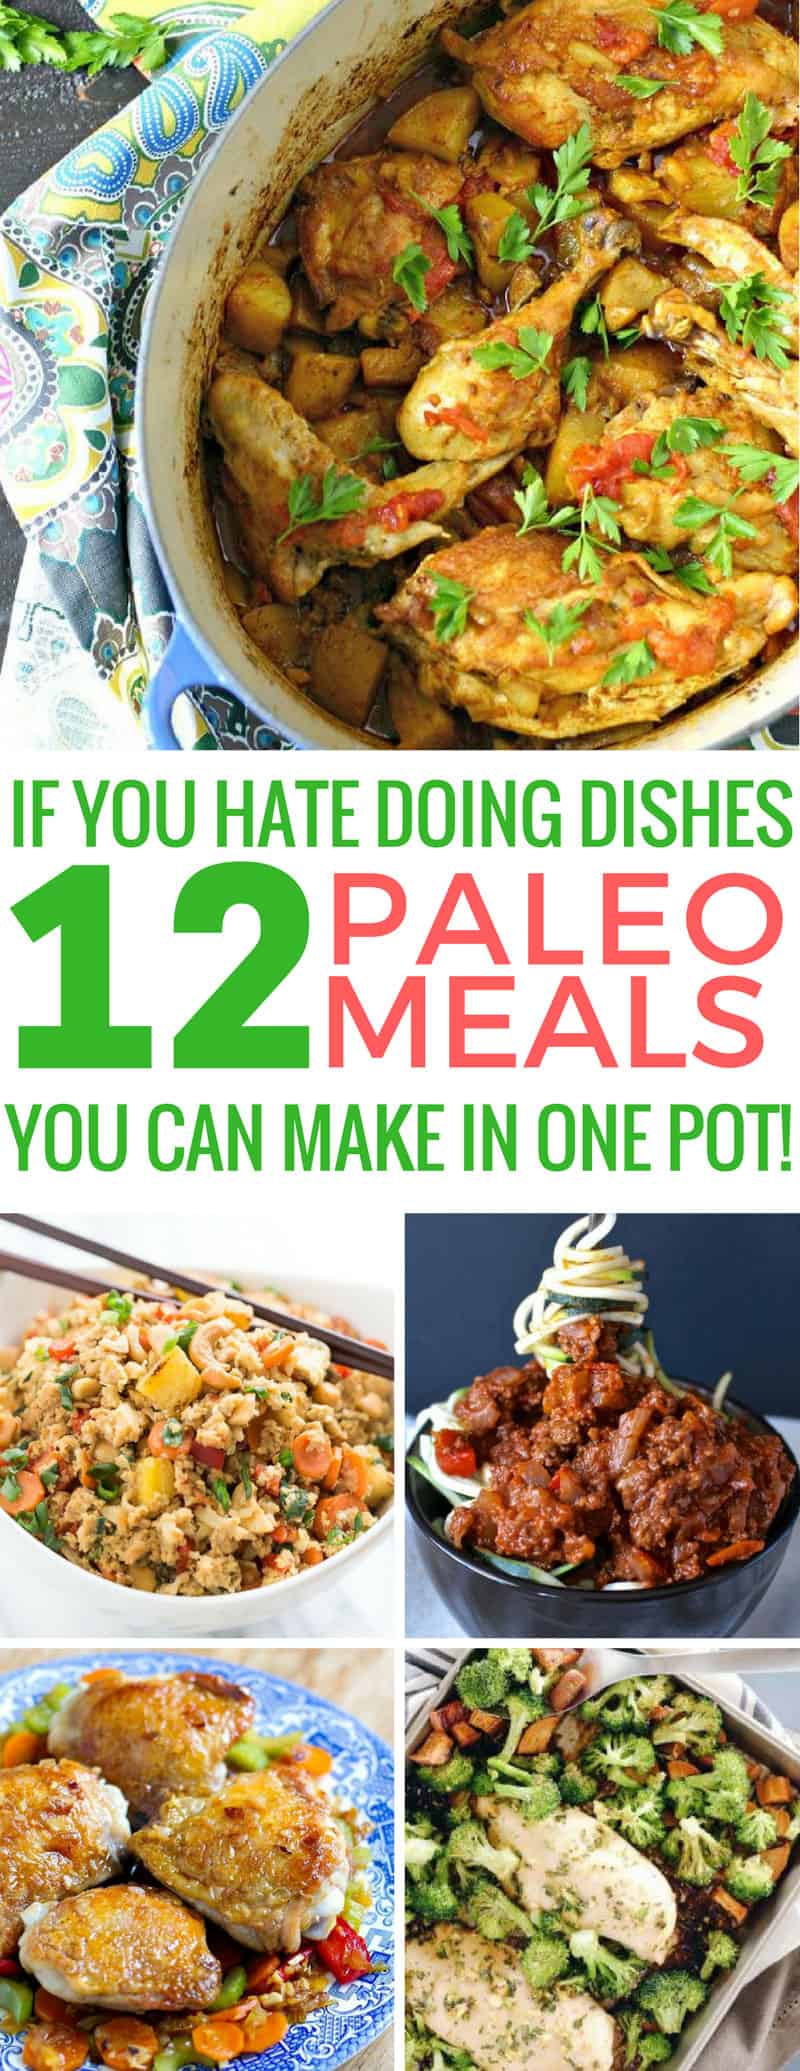 Loving these one pot paleo meals - I hate doing dishes! Thanks for sharing!